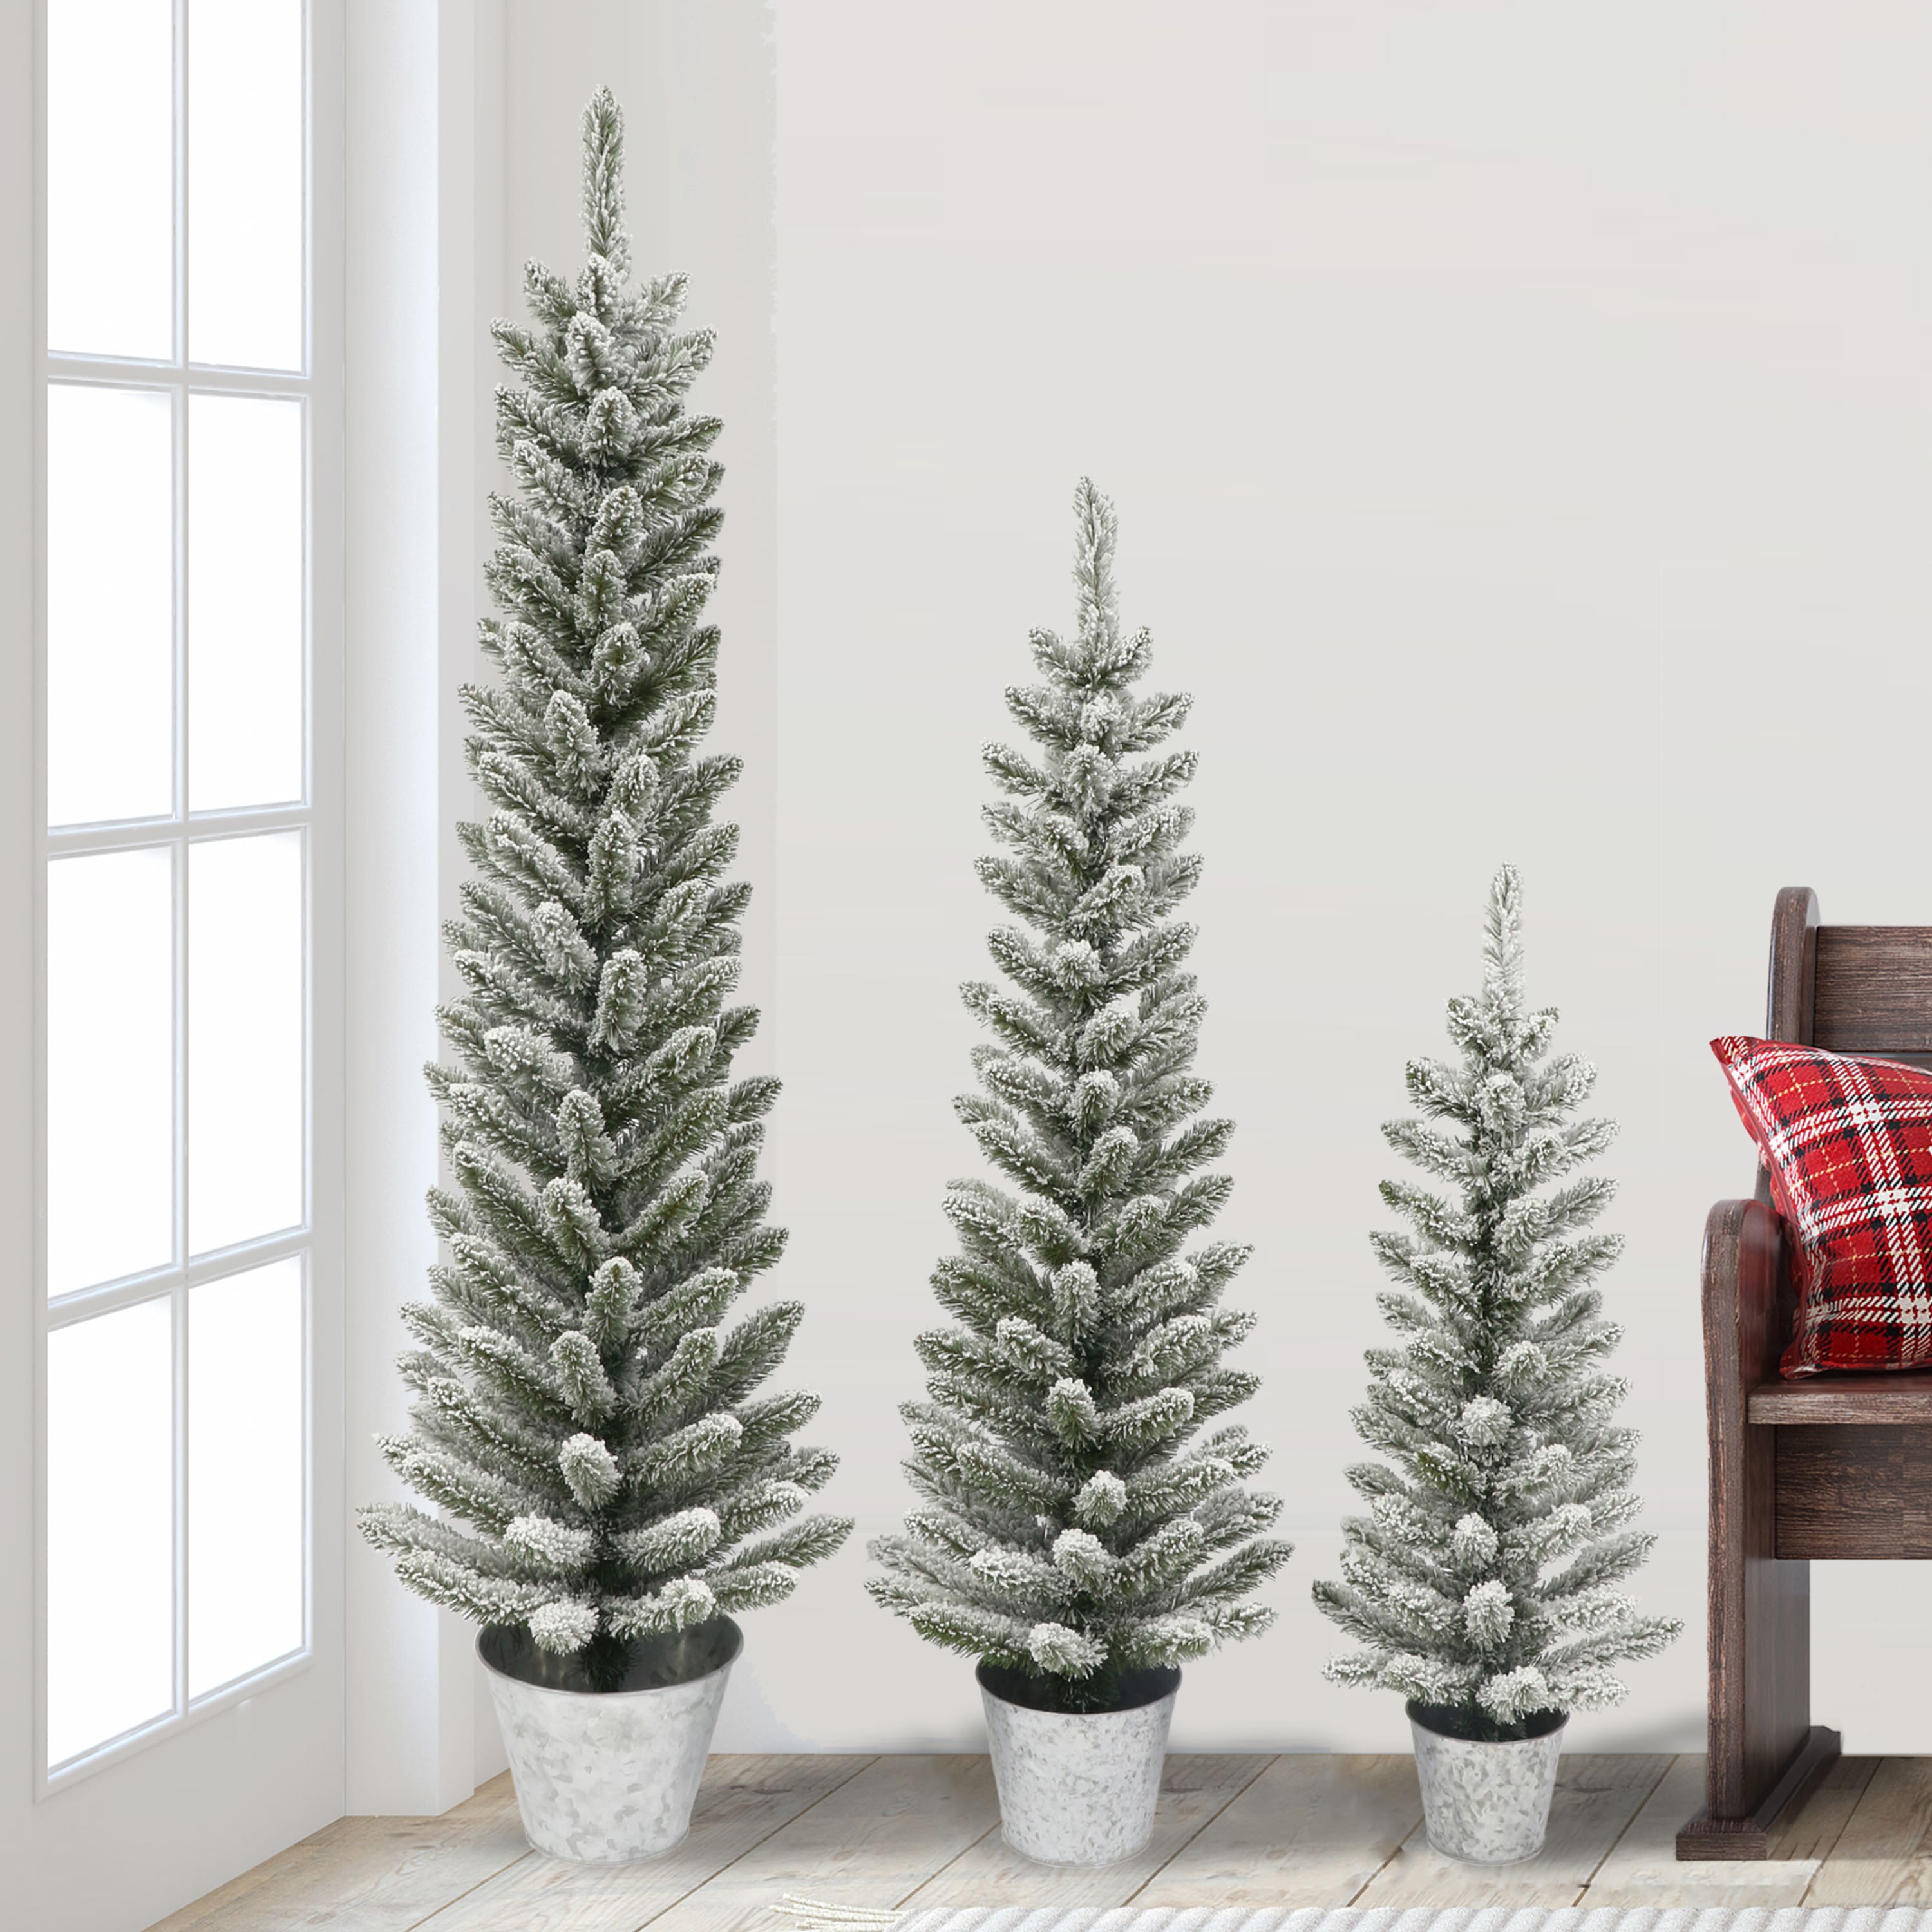 3 Pack Potted Flocked Artificial Christmas Trees